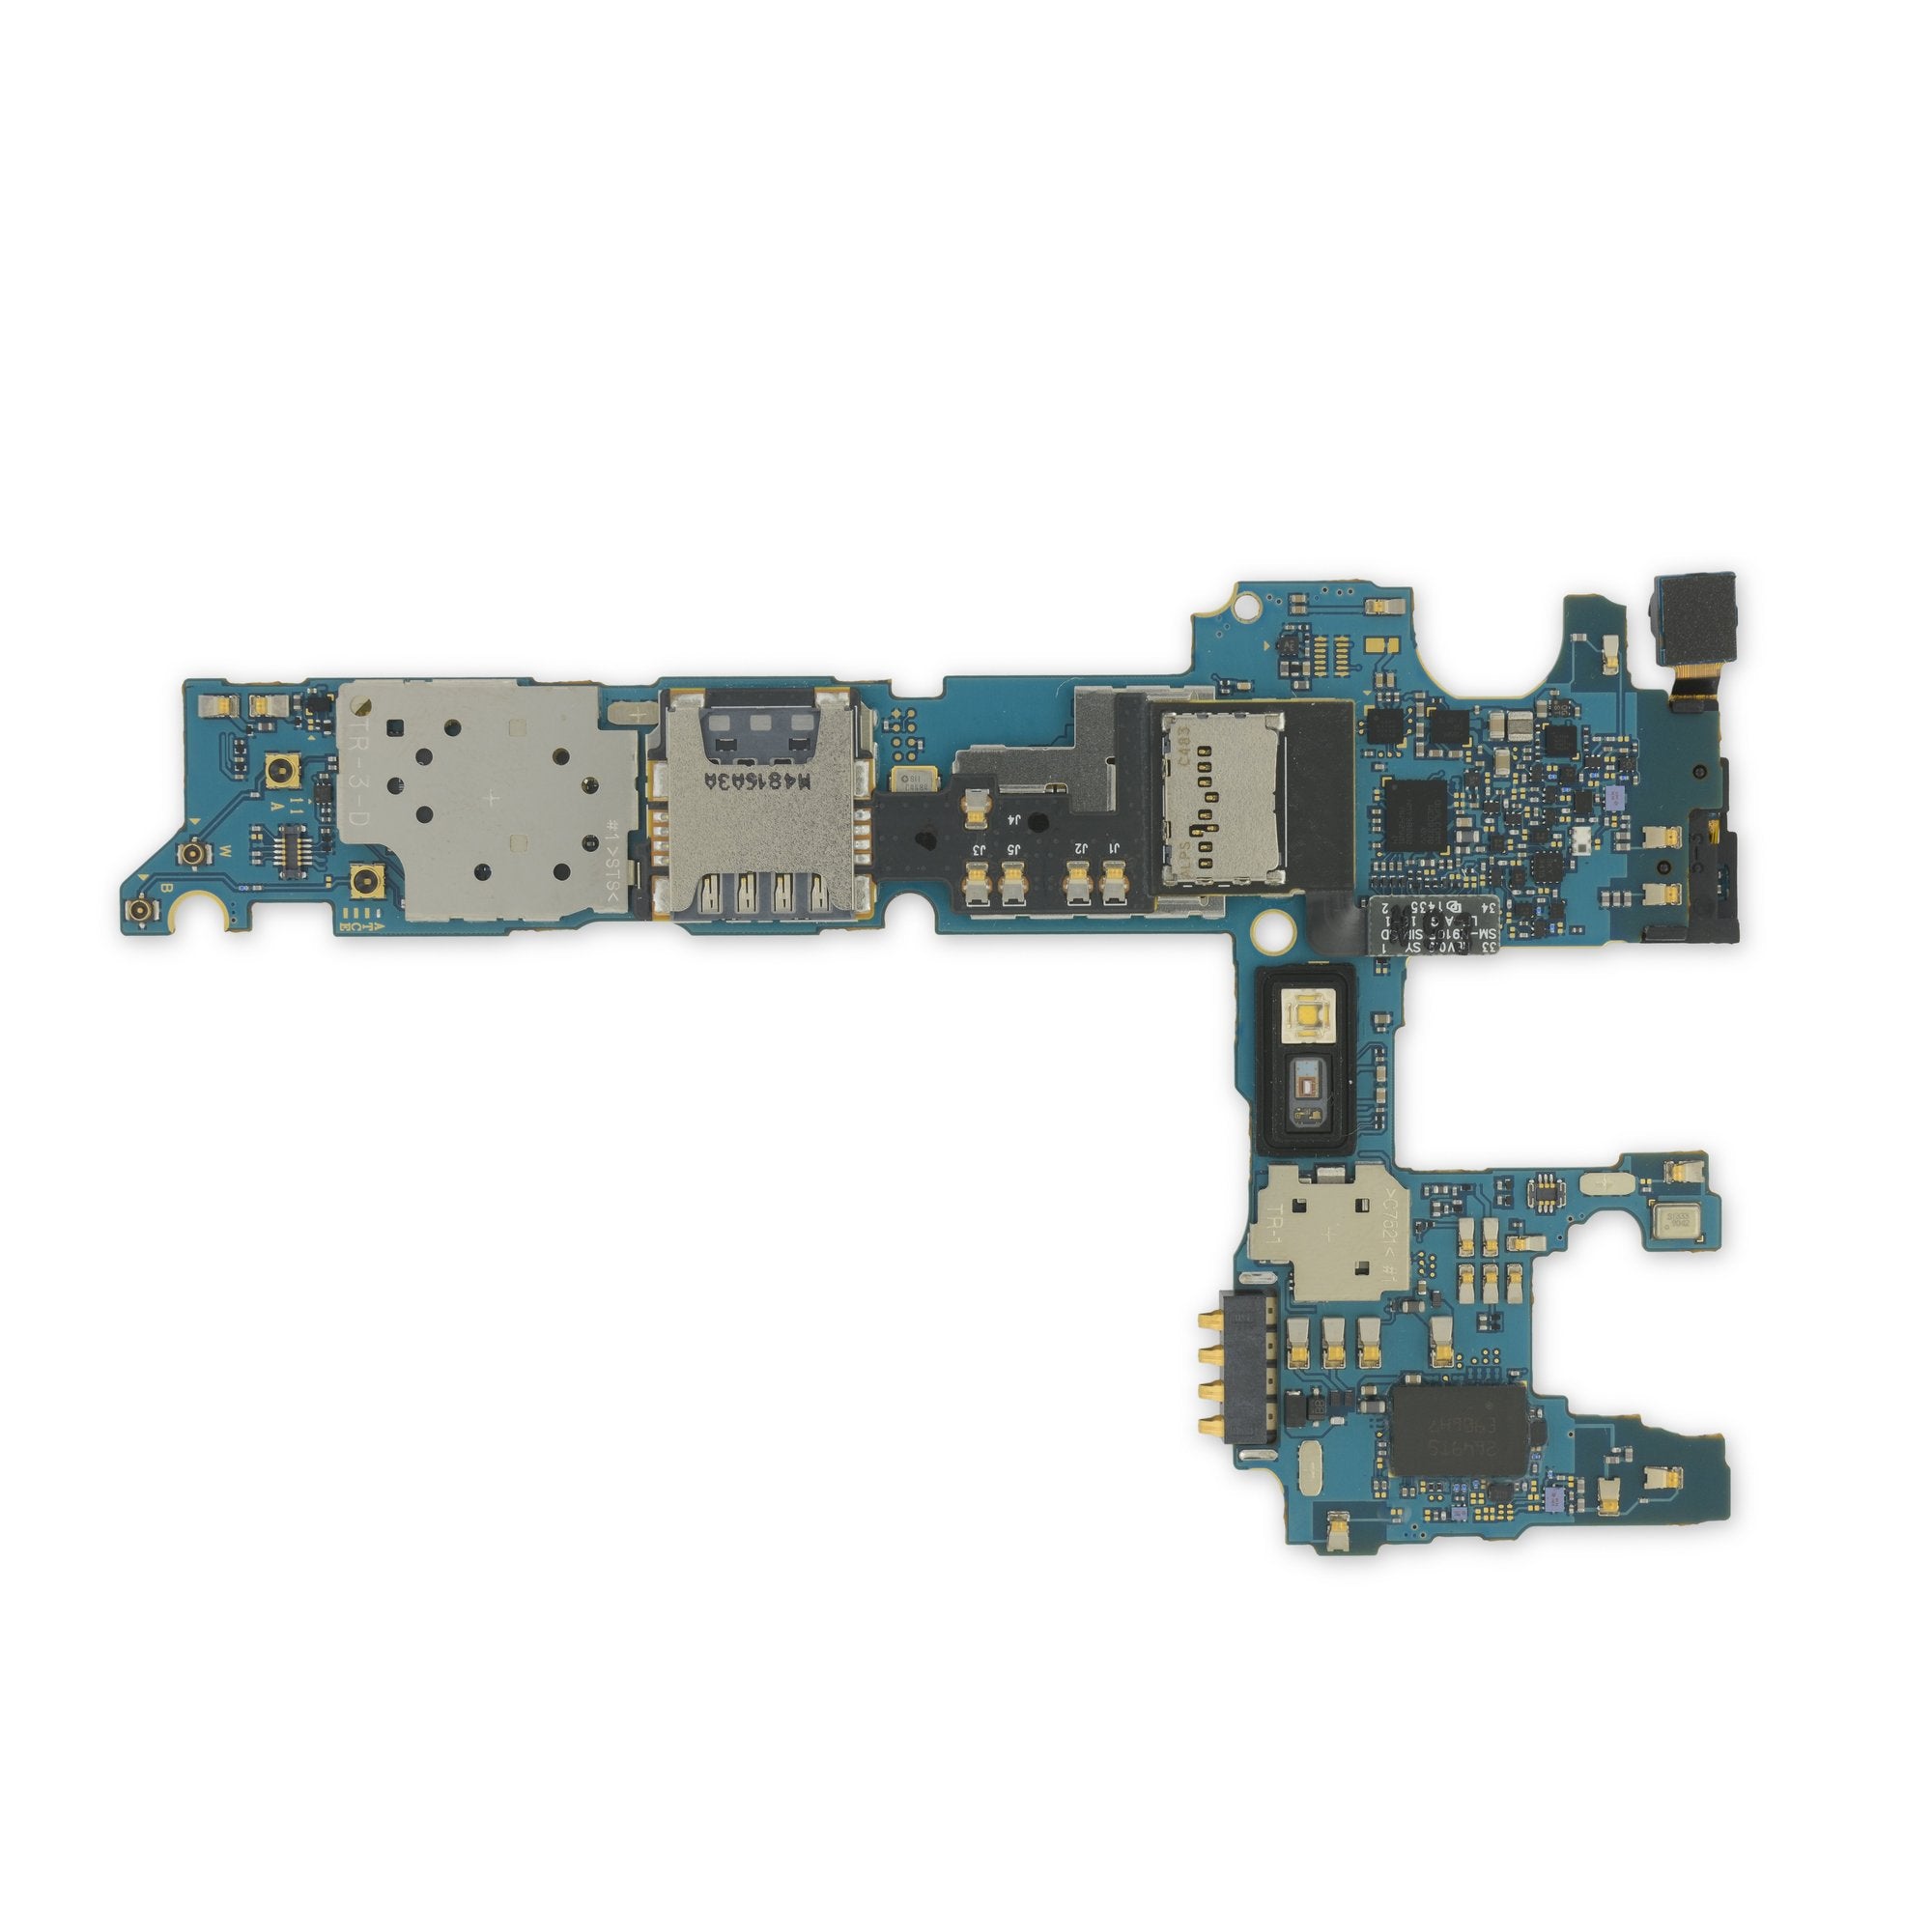 Galaxy Note 4 Motherboard (AT&T) Used